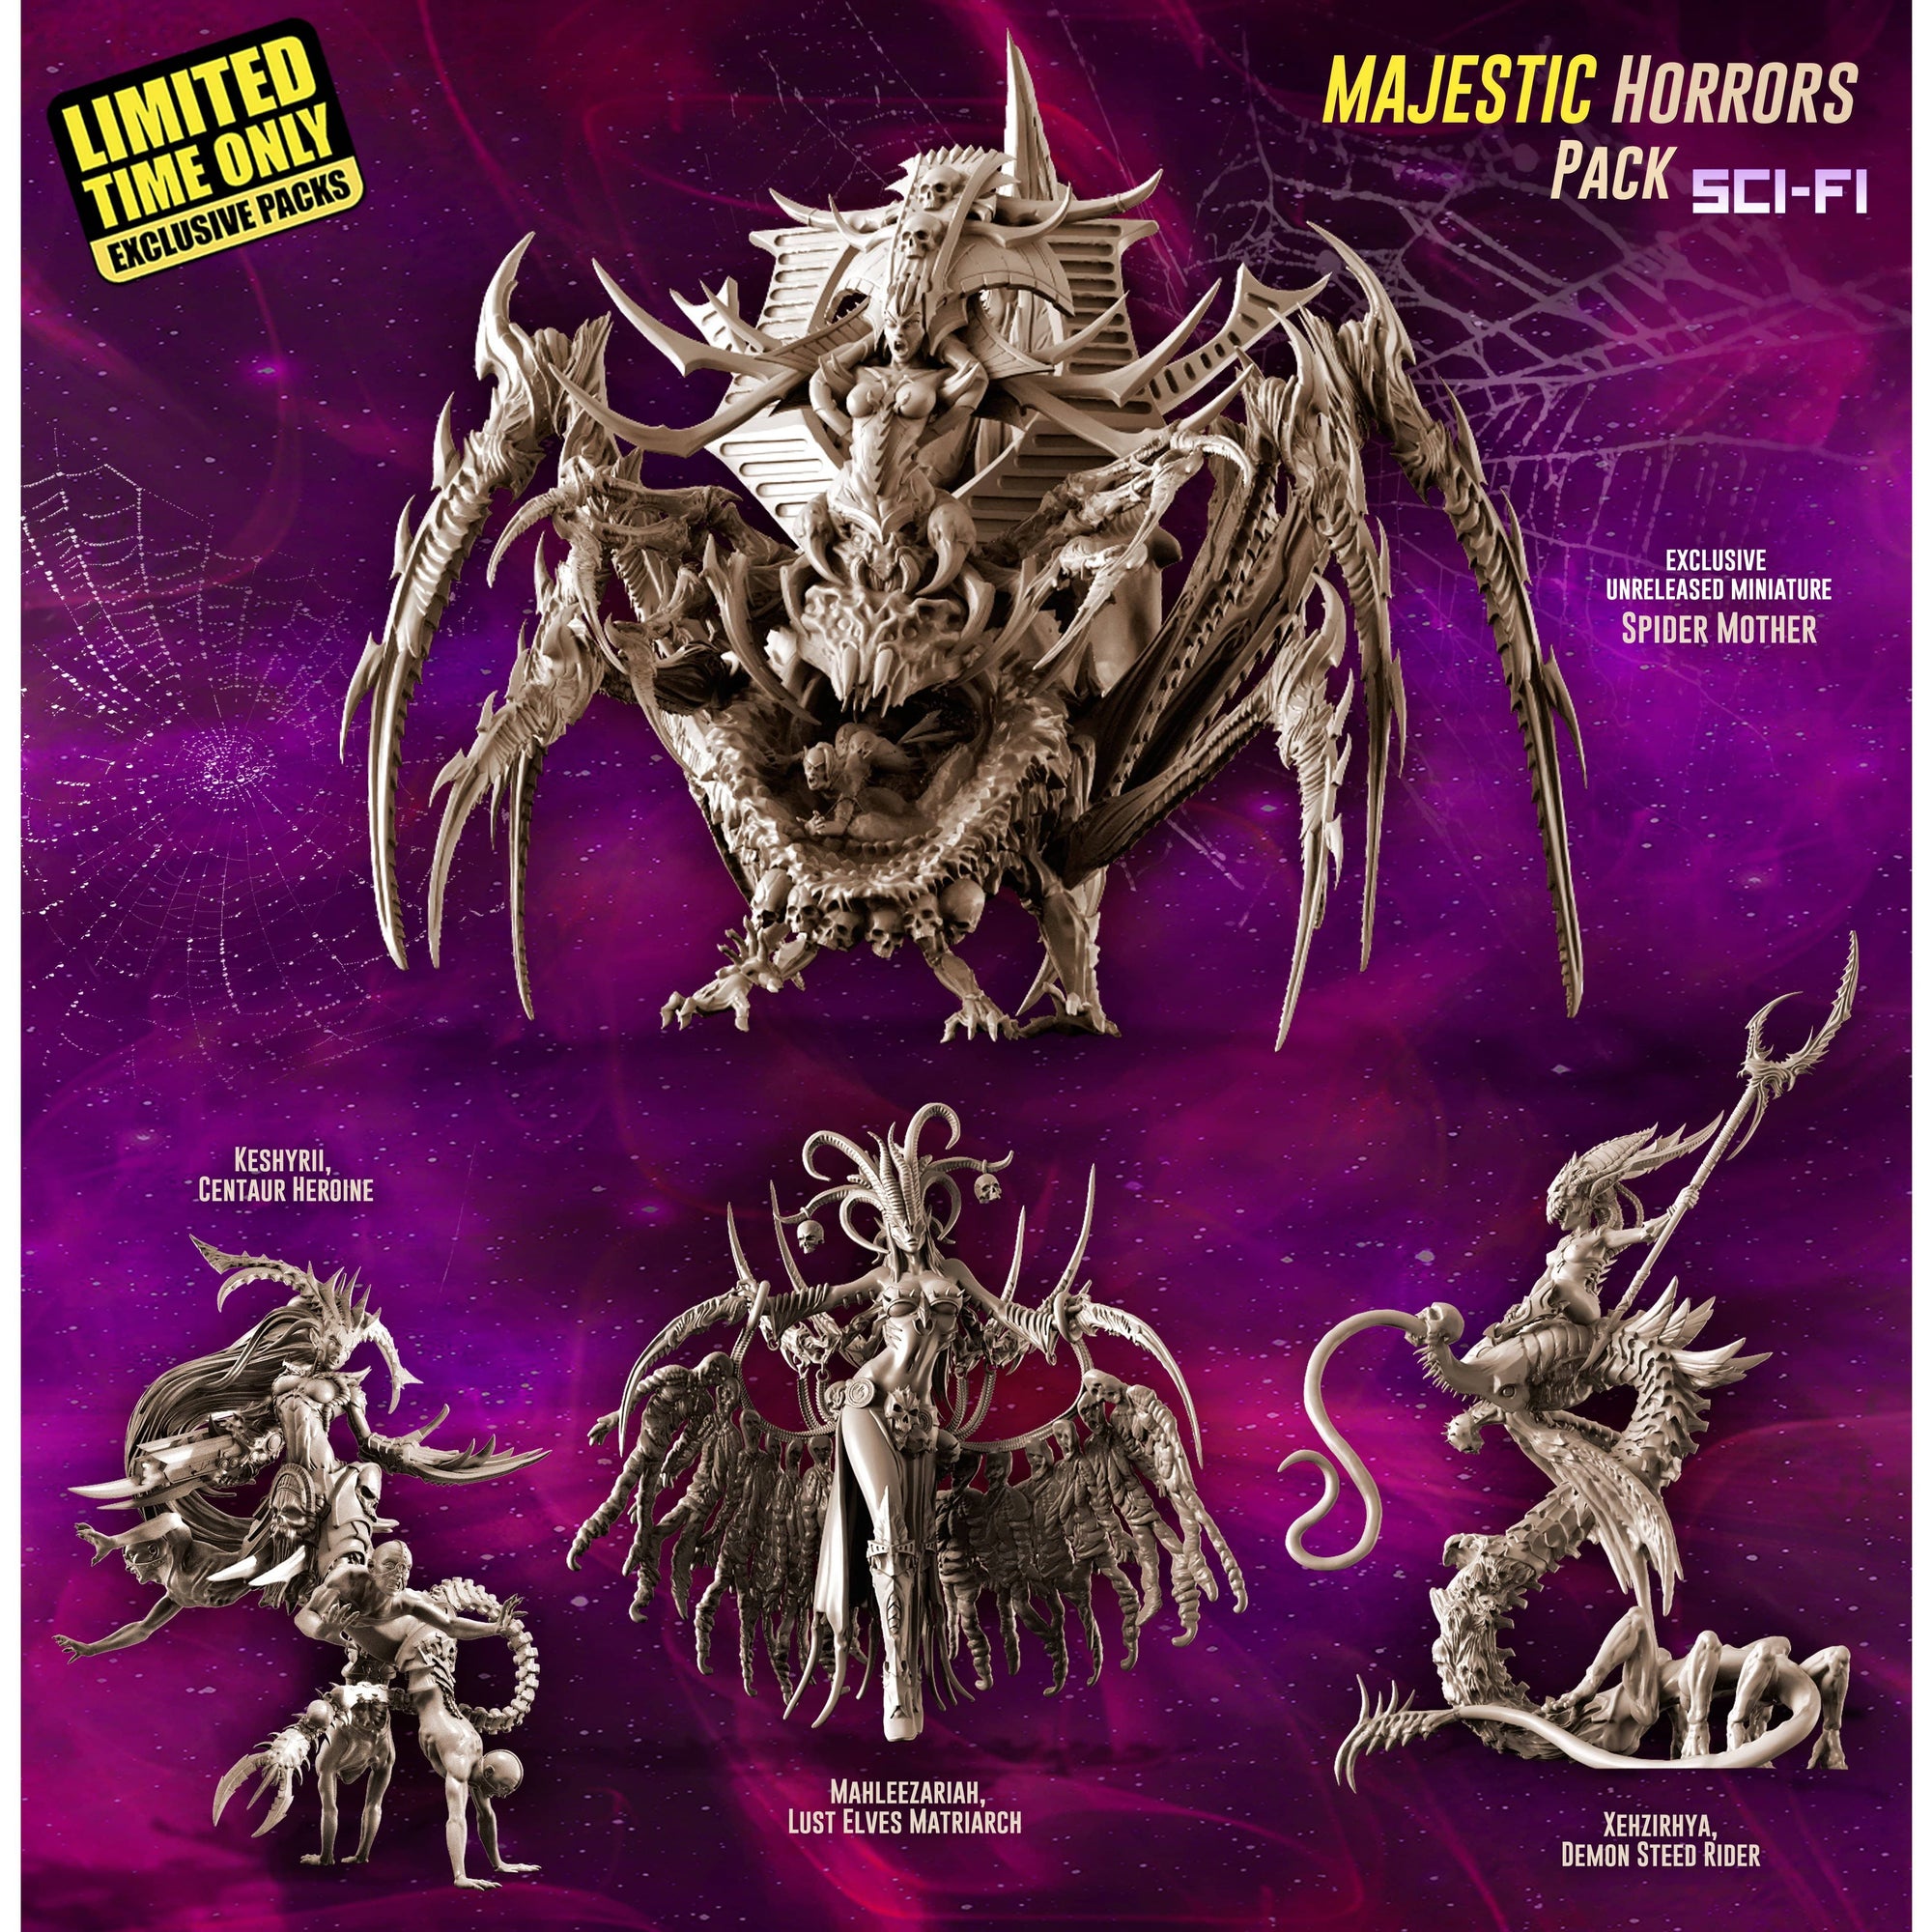 Pack exclusiv Majestic Horrors (LE - Sci -Fi)